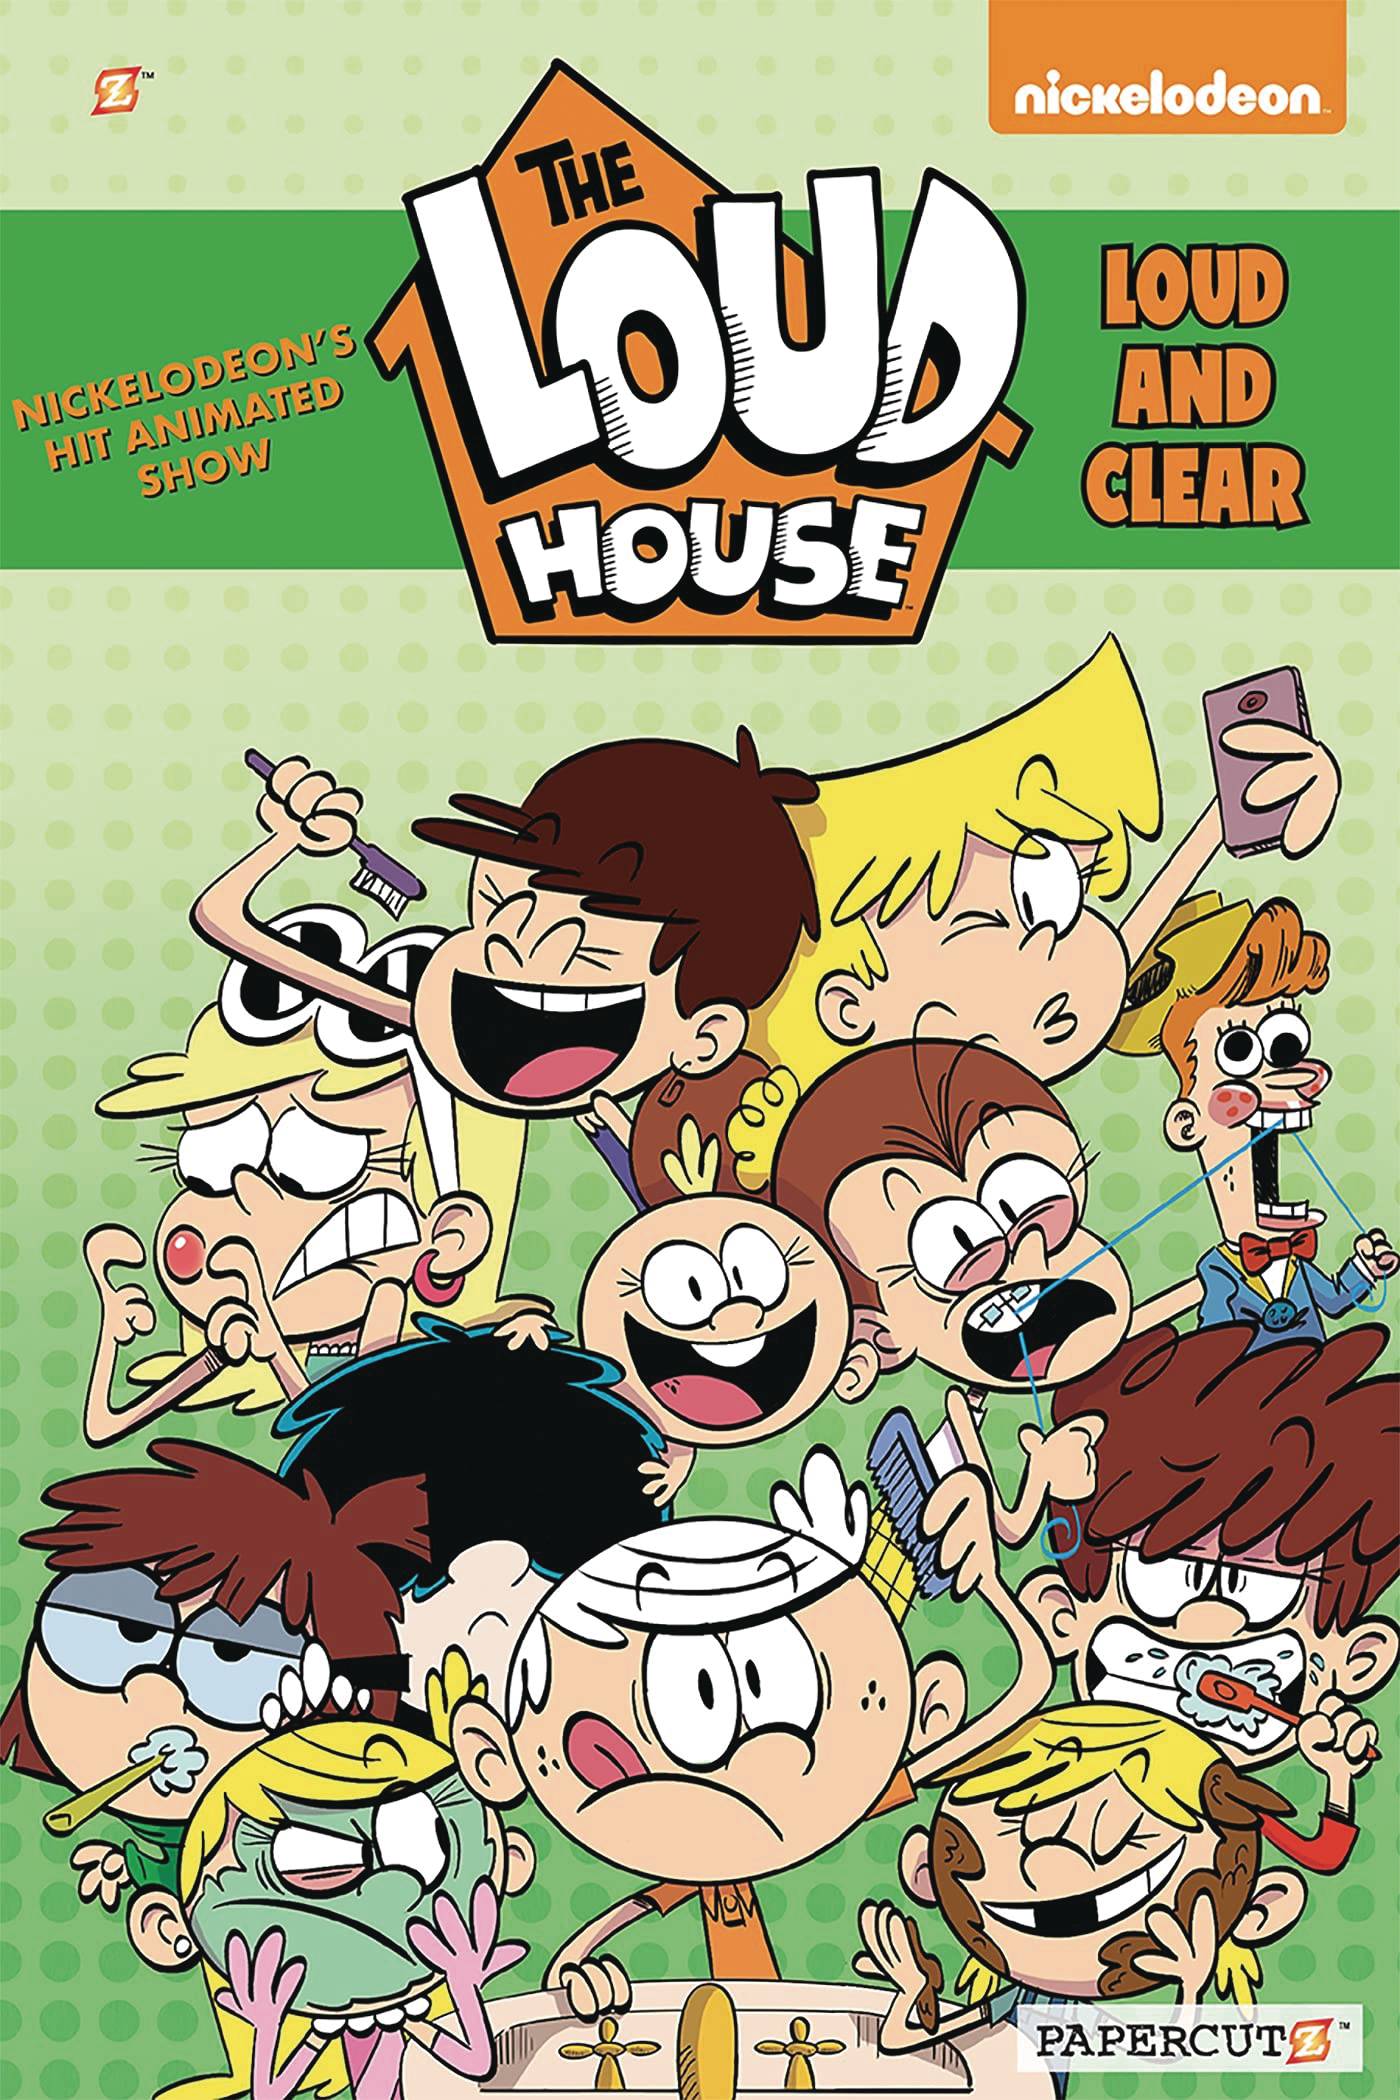 LOUD HOUSE SC VOL 16 LOUD AND CLEAR